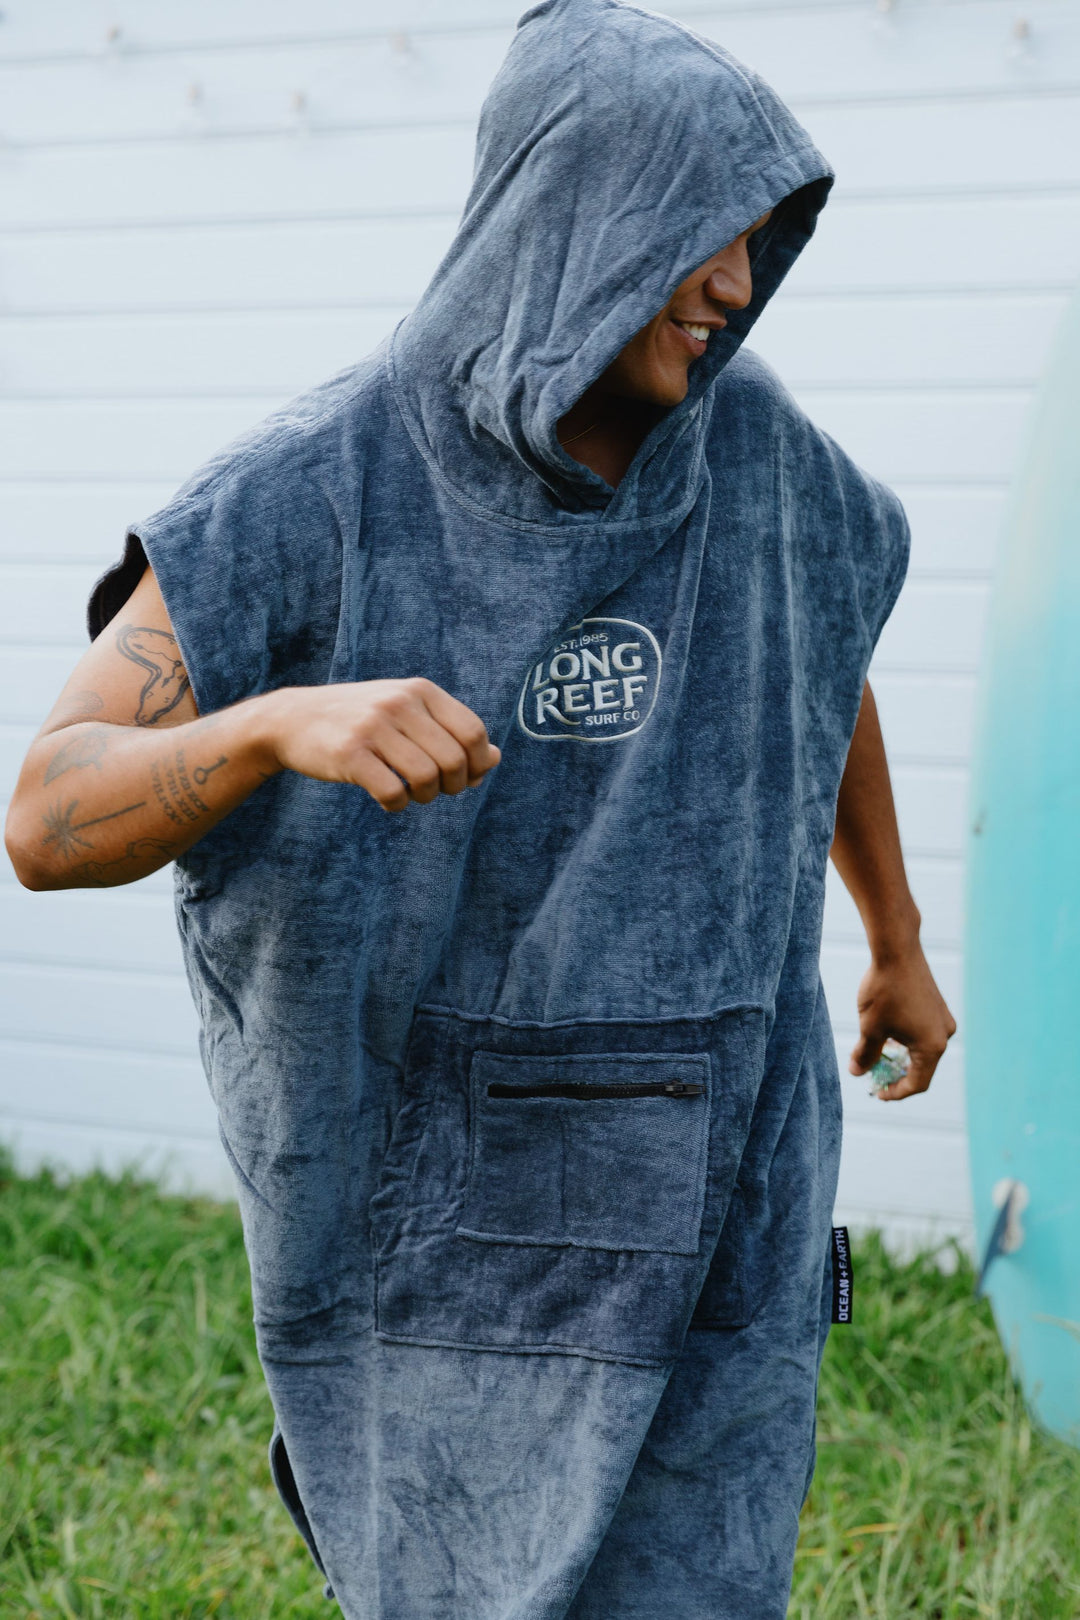 Long Reef Surf Co Poncho Hooded Towel - Navy